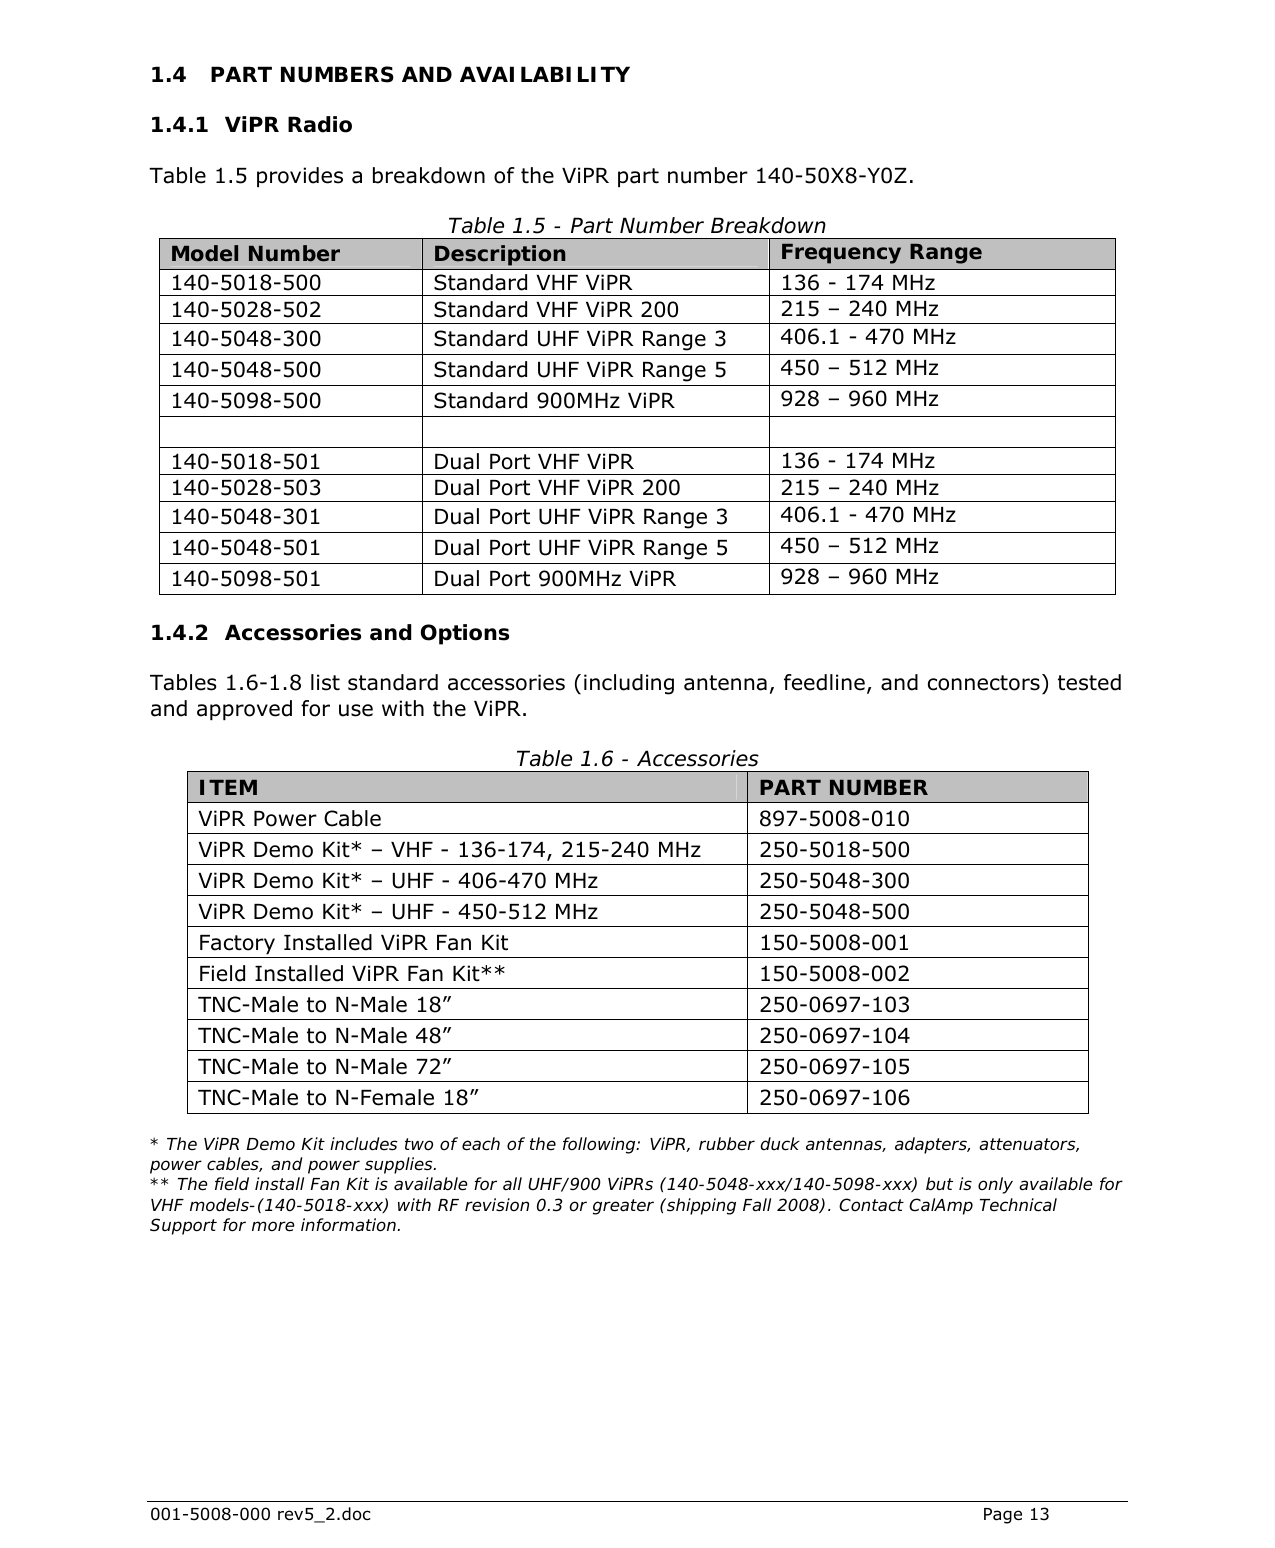  001-5008-000 rev5_2.doc    Page 13 1.4 PART NUMBERS AND AVAILABILITY 1.4.1 ViPR Radio Table 1.5 provides a breakdown of the ViPR part number 140-50X8-Y0Z.  Table 1.5 - Part Number Breakdown Model Number  Description  Frequency Range 140-5018-500  Standard VHF ViPR  136 - 174 MHz 140-5028-502  Standard VHF ViPR 200  215 – 240 MHz 140-5048-300  Standard UHF ViPR Range 3  406.1 - 470 MHz 140-5048-500  Standard UHF ViPR Range 5  450 – 512 MHz 140-5098-500  Standard 900MHz ViPR  928 – 960 MHz     140-5018-501  Dual Port VHF ViPR  136 - 174 MHz 140-5028-503  Dual Port VHF ViPR 200  215 – 240 MHz 140-5048-301  Dual Port UHF ViPR Range 3  406.1 - 470 MHz 140-5048-501  Dual Port UHF ViPR Range 5  450 – 512 MHz 140-5098-501  Dual Port 900MHz ViPR  928 – 960 MHz 1.4.2 Accessories and Options Tables 1.6-1.8 list standard accessories (including antenna, feedline, and connectors) tested and approved for use with the ViPR. Table 1.6 - Accessories ITEM  PART NUMBER ViPR Power Cable  897-5008-010  ViPR Demo Kit* – VHF - 136-174, 215-240 MHz  250-5018-500 ViPR Demo Kit* – UHF - 406-470 MHz  250-5048-300 ViPR Demo Kit* – UHF - 450-512 MHz  250-5048-500 Factory Installed ViPR Fan Kit  150-5008-001 Field Installed ViPR Fan Kit**  150-5008-002 TNC-Male to N-Male 18”  250-0697-103 TNC-Male to N-Male 48”  250-0697-104 TNC-Male to N-Male 72”  250-0697-105 TNC-Male to N-Female 18”  250-0697-106  * The ViPR Demo Kit includes two of each of the following: ViPR, rubber duck antennas, adapters, attenuators, power cables, and power supplies. ** The field install Fan Kit is available for all UHF/900 ViPRs (140-5048-xxx/140-5098-xxx) but is only available for VHF models-(140-5018-xxx) with RF revision 0.3 or greater (shipping Fall 2008). Contact CalAmp Technical Support for more information.  